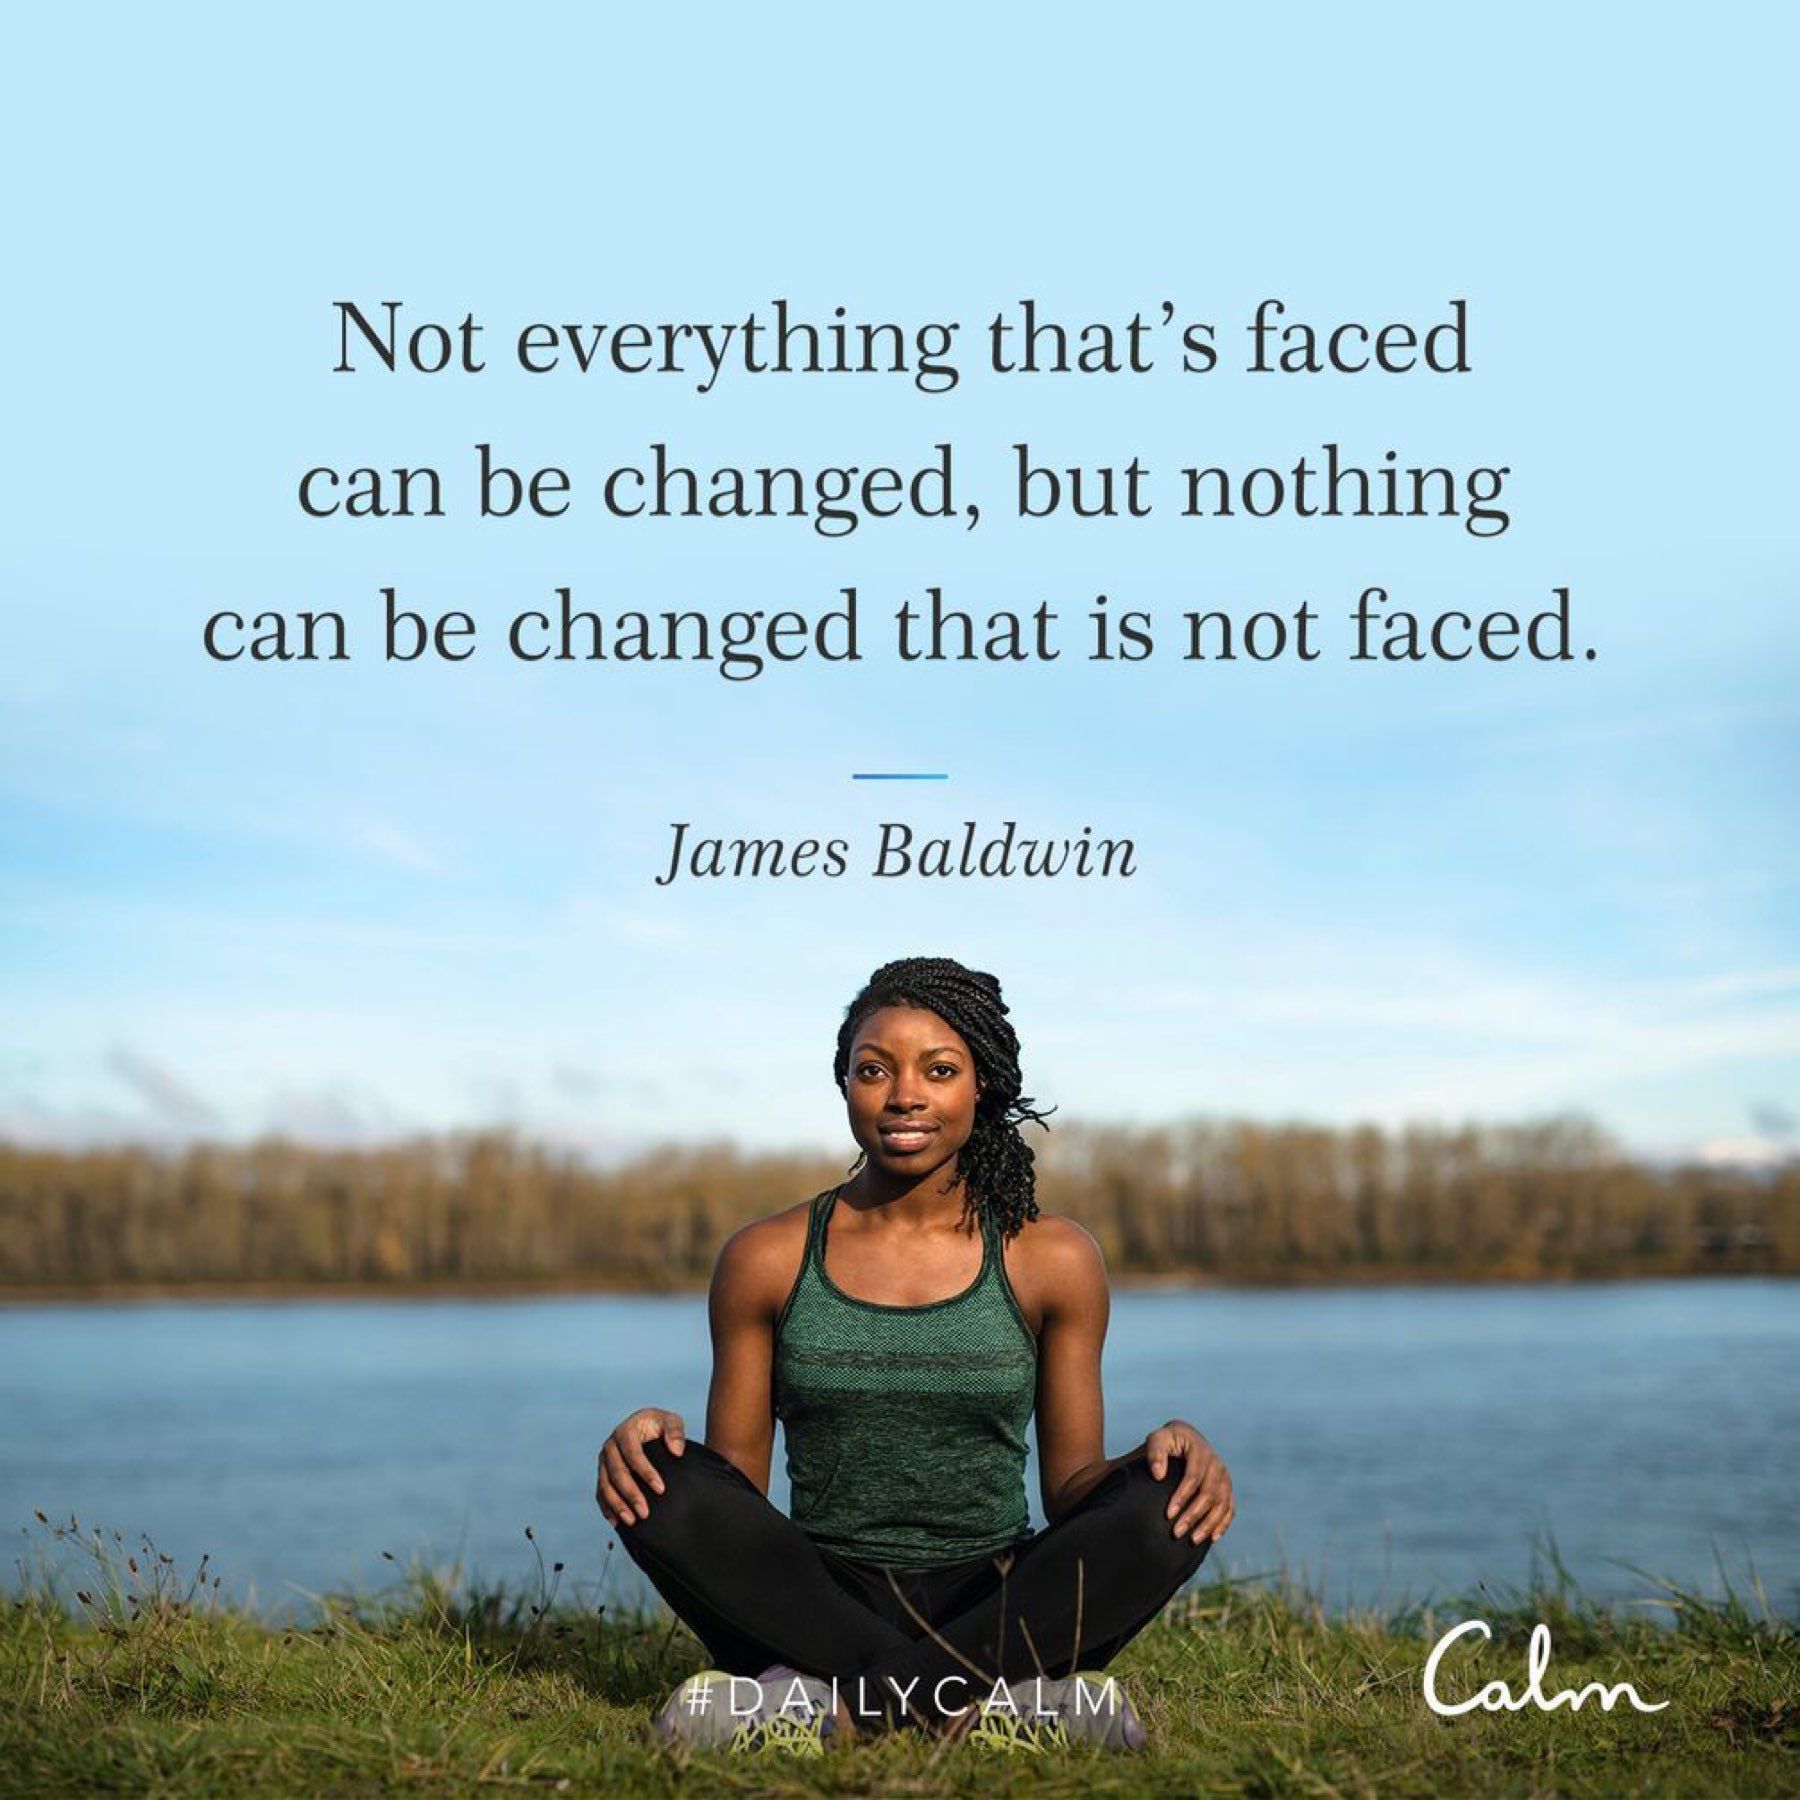 Nothing can be changed without being faced